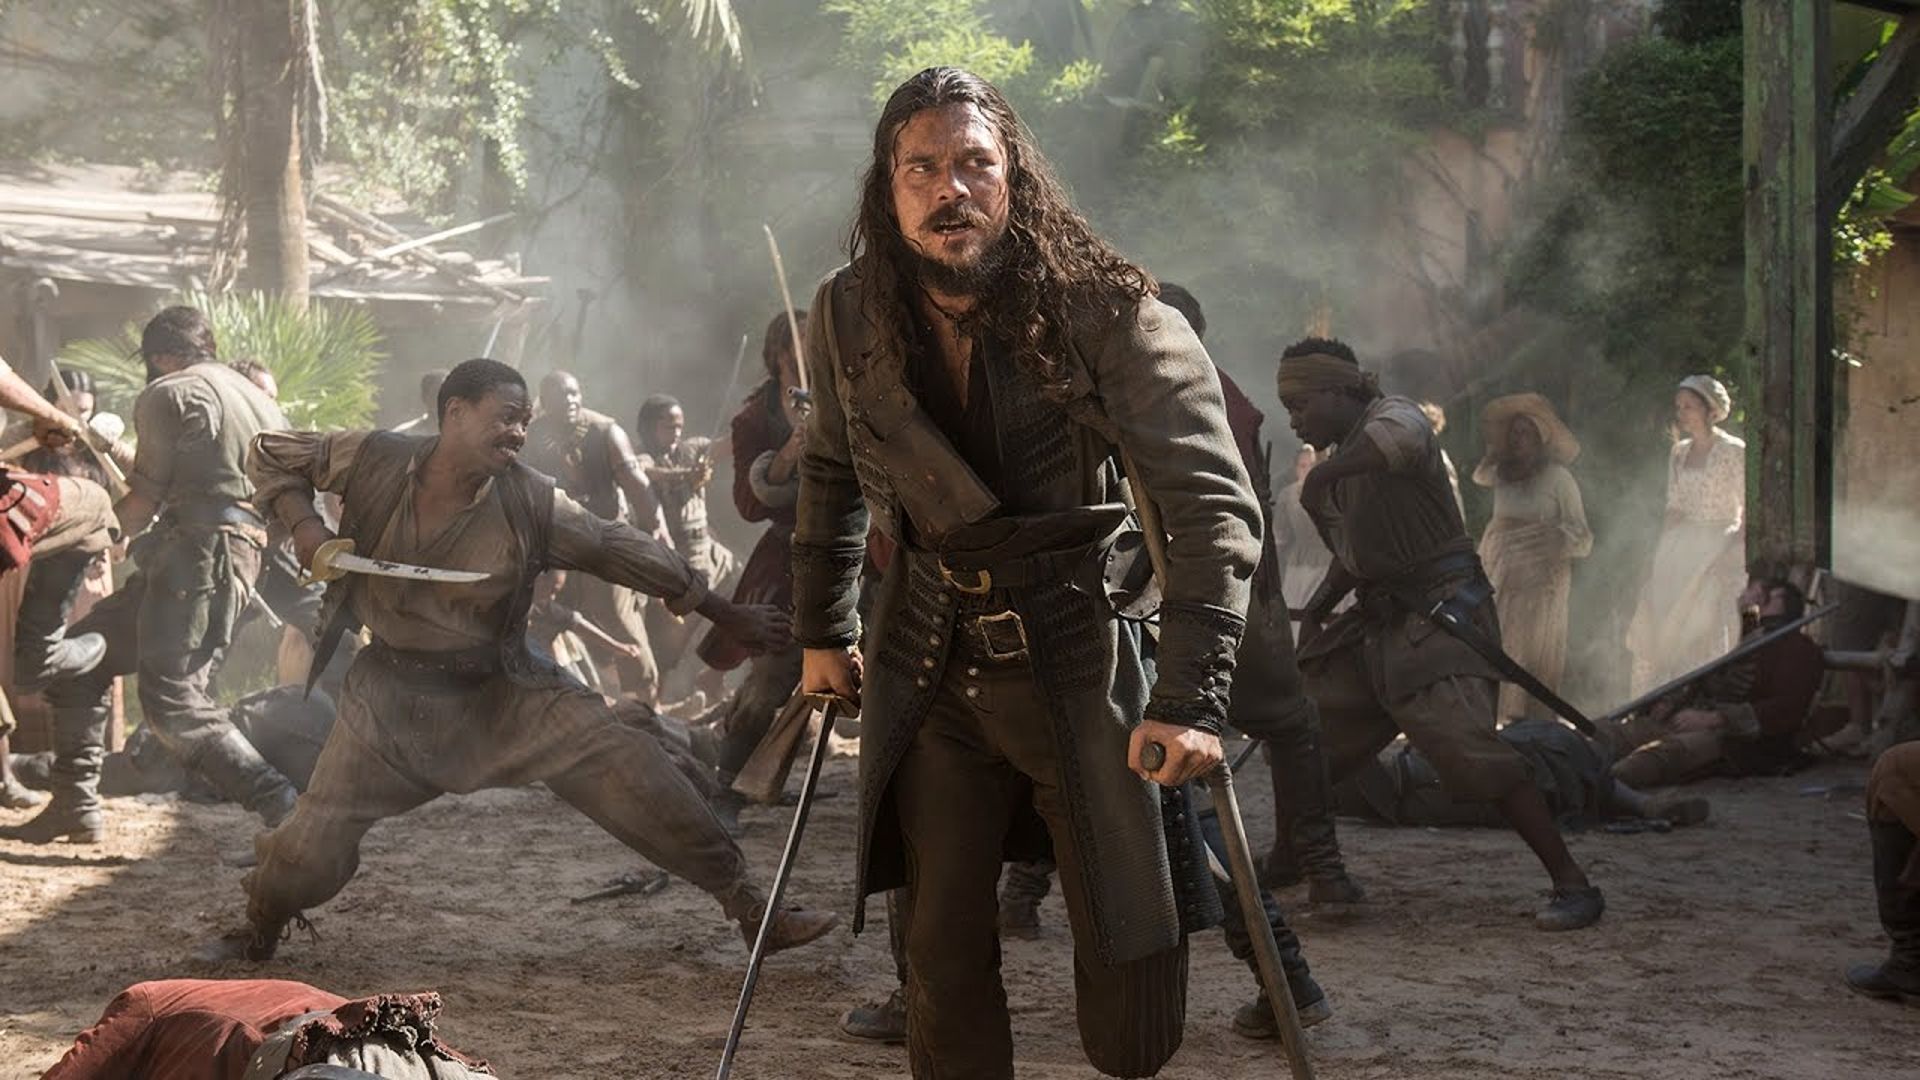 Silver holds a sword in battle in Black Sails